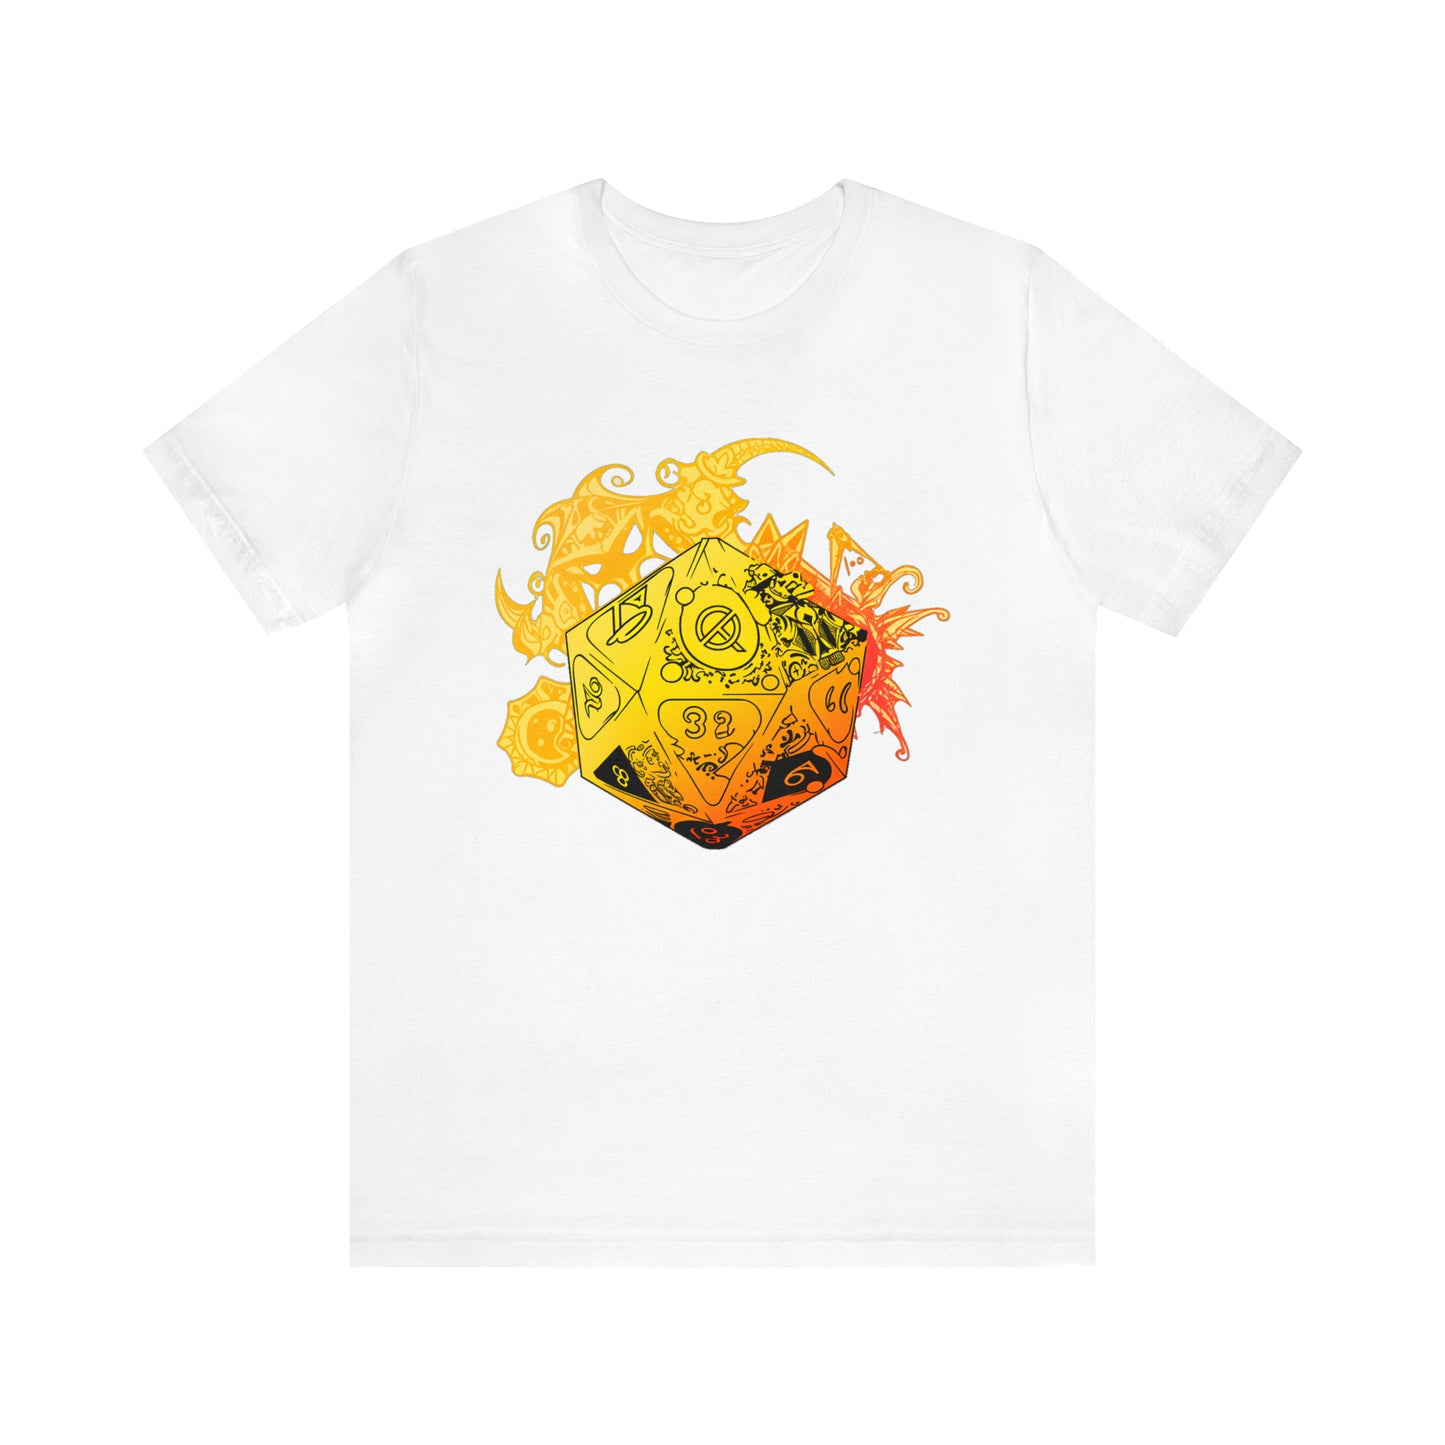 white-quest-thread-tee-shirt-with-large-yellow-dragon-dice-on-center-of-shirt